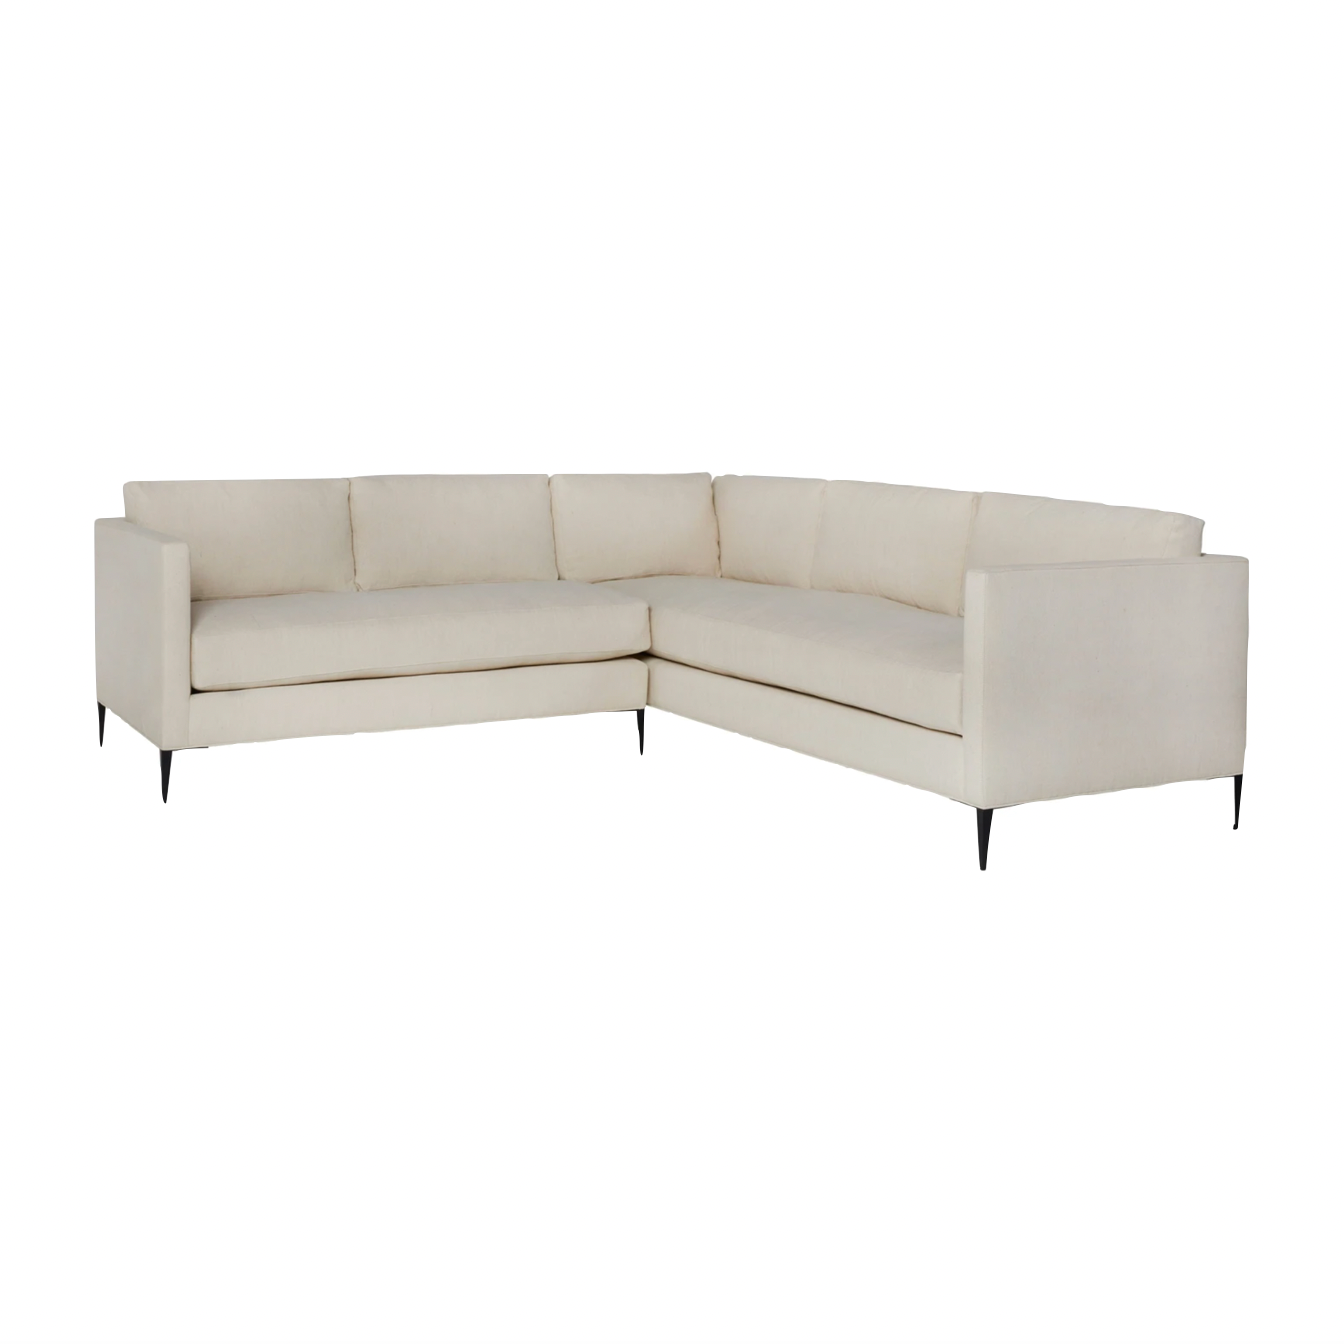 The Benedict 2 Arm Sectional - Essentials by Cisco Brothers is a modern design with clean lines and sleek metal legs in black rust. It has a fresh and functional aesthetic with no-sag support. Photographed in Vanocur Natural and Navedo Gravel.  Overall: 96"w x 96"d x 29"h